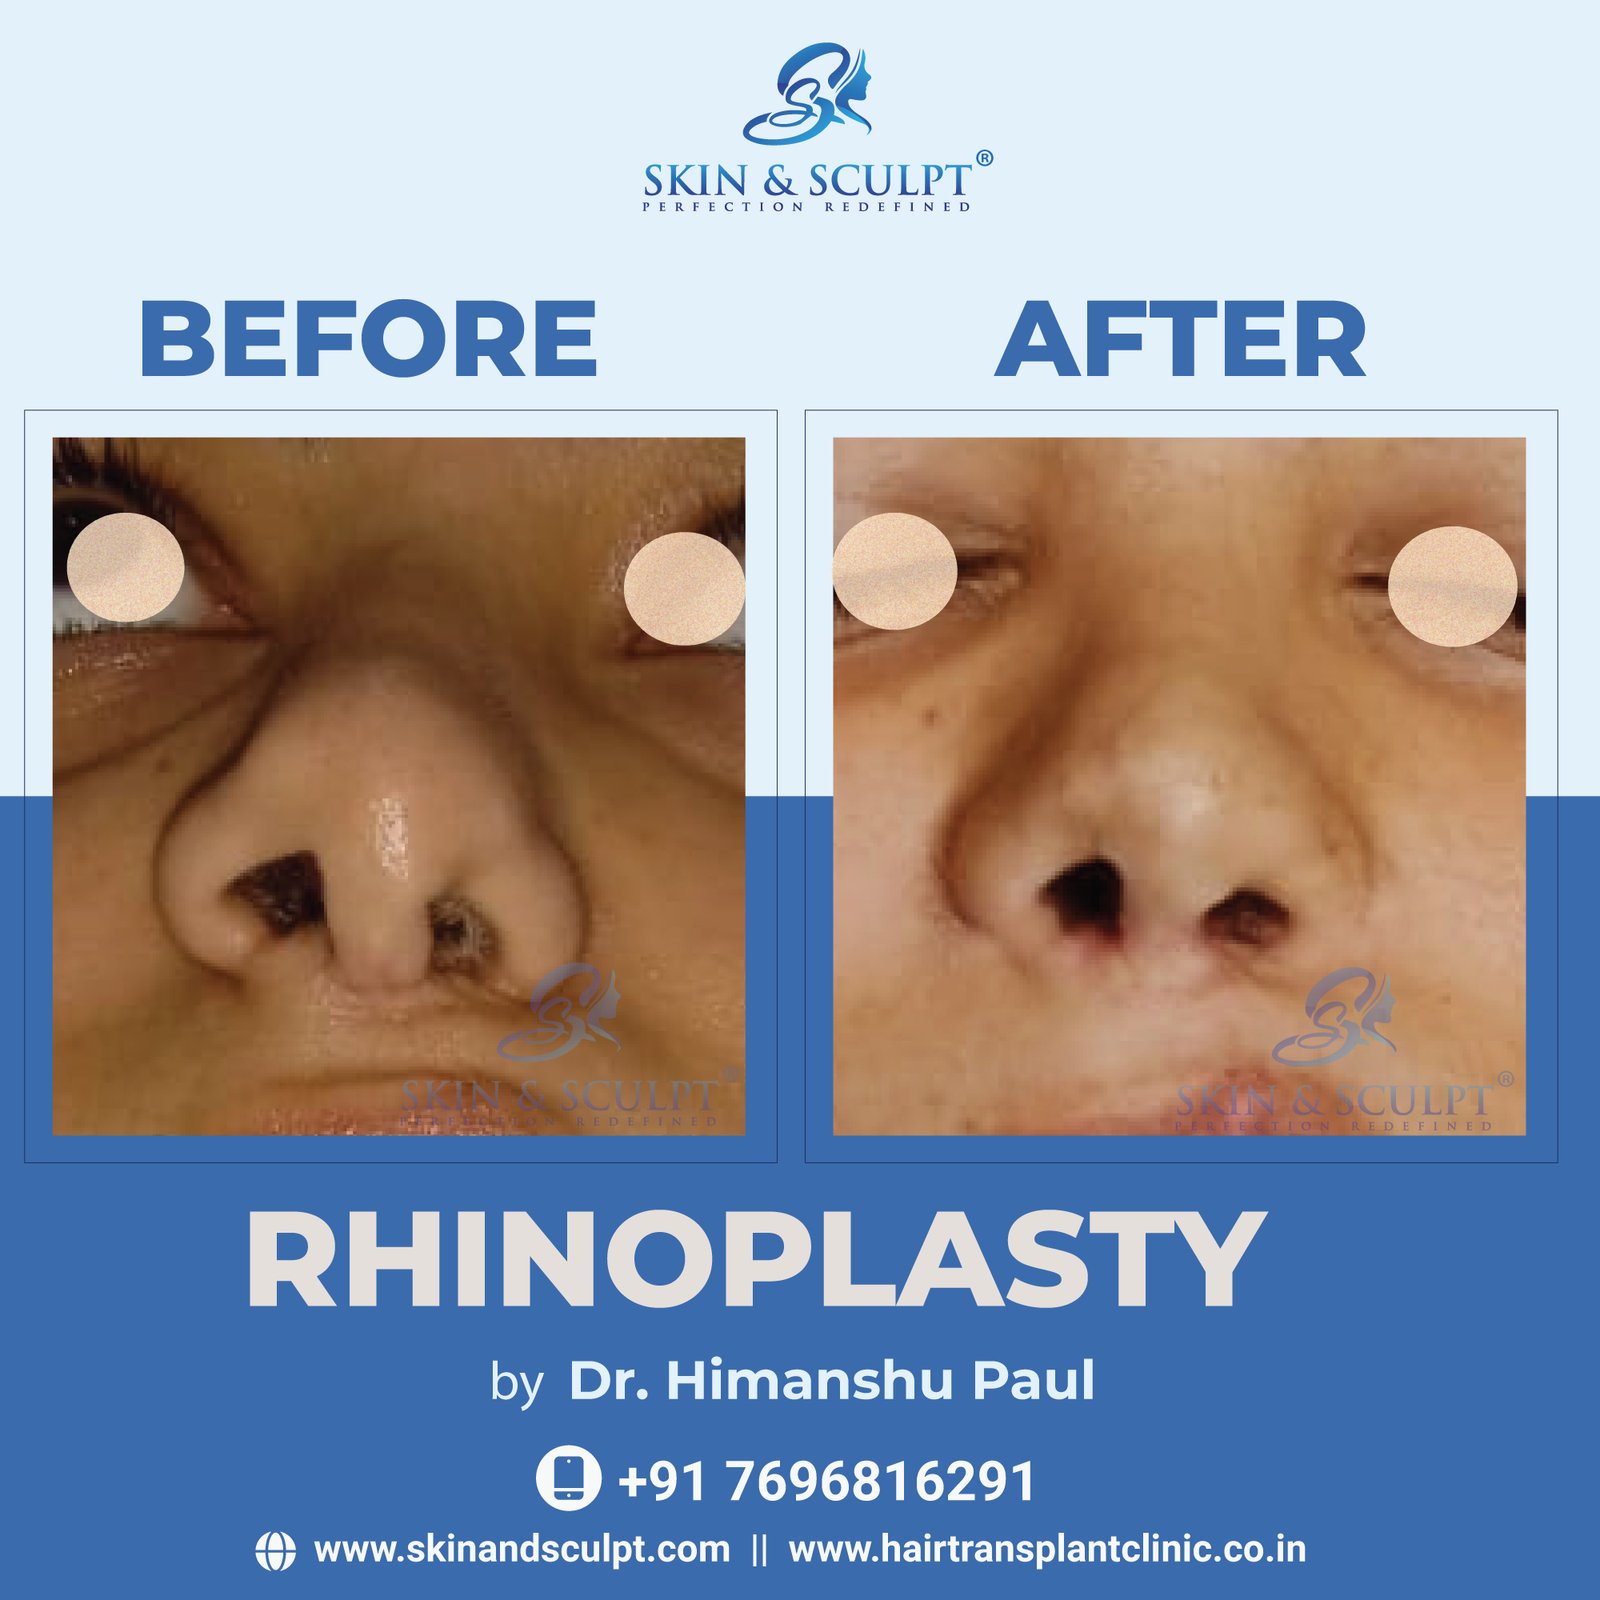 Rhinoplasty in Chandigarh By Dr. Himanshu Paul (Skin and Sculpt)